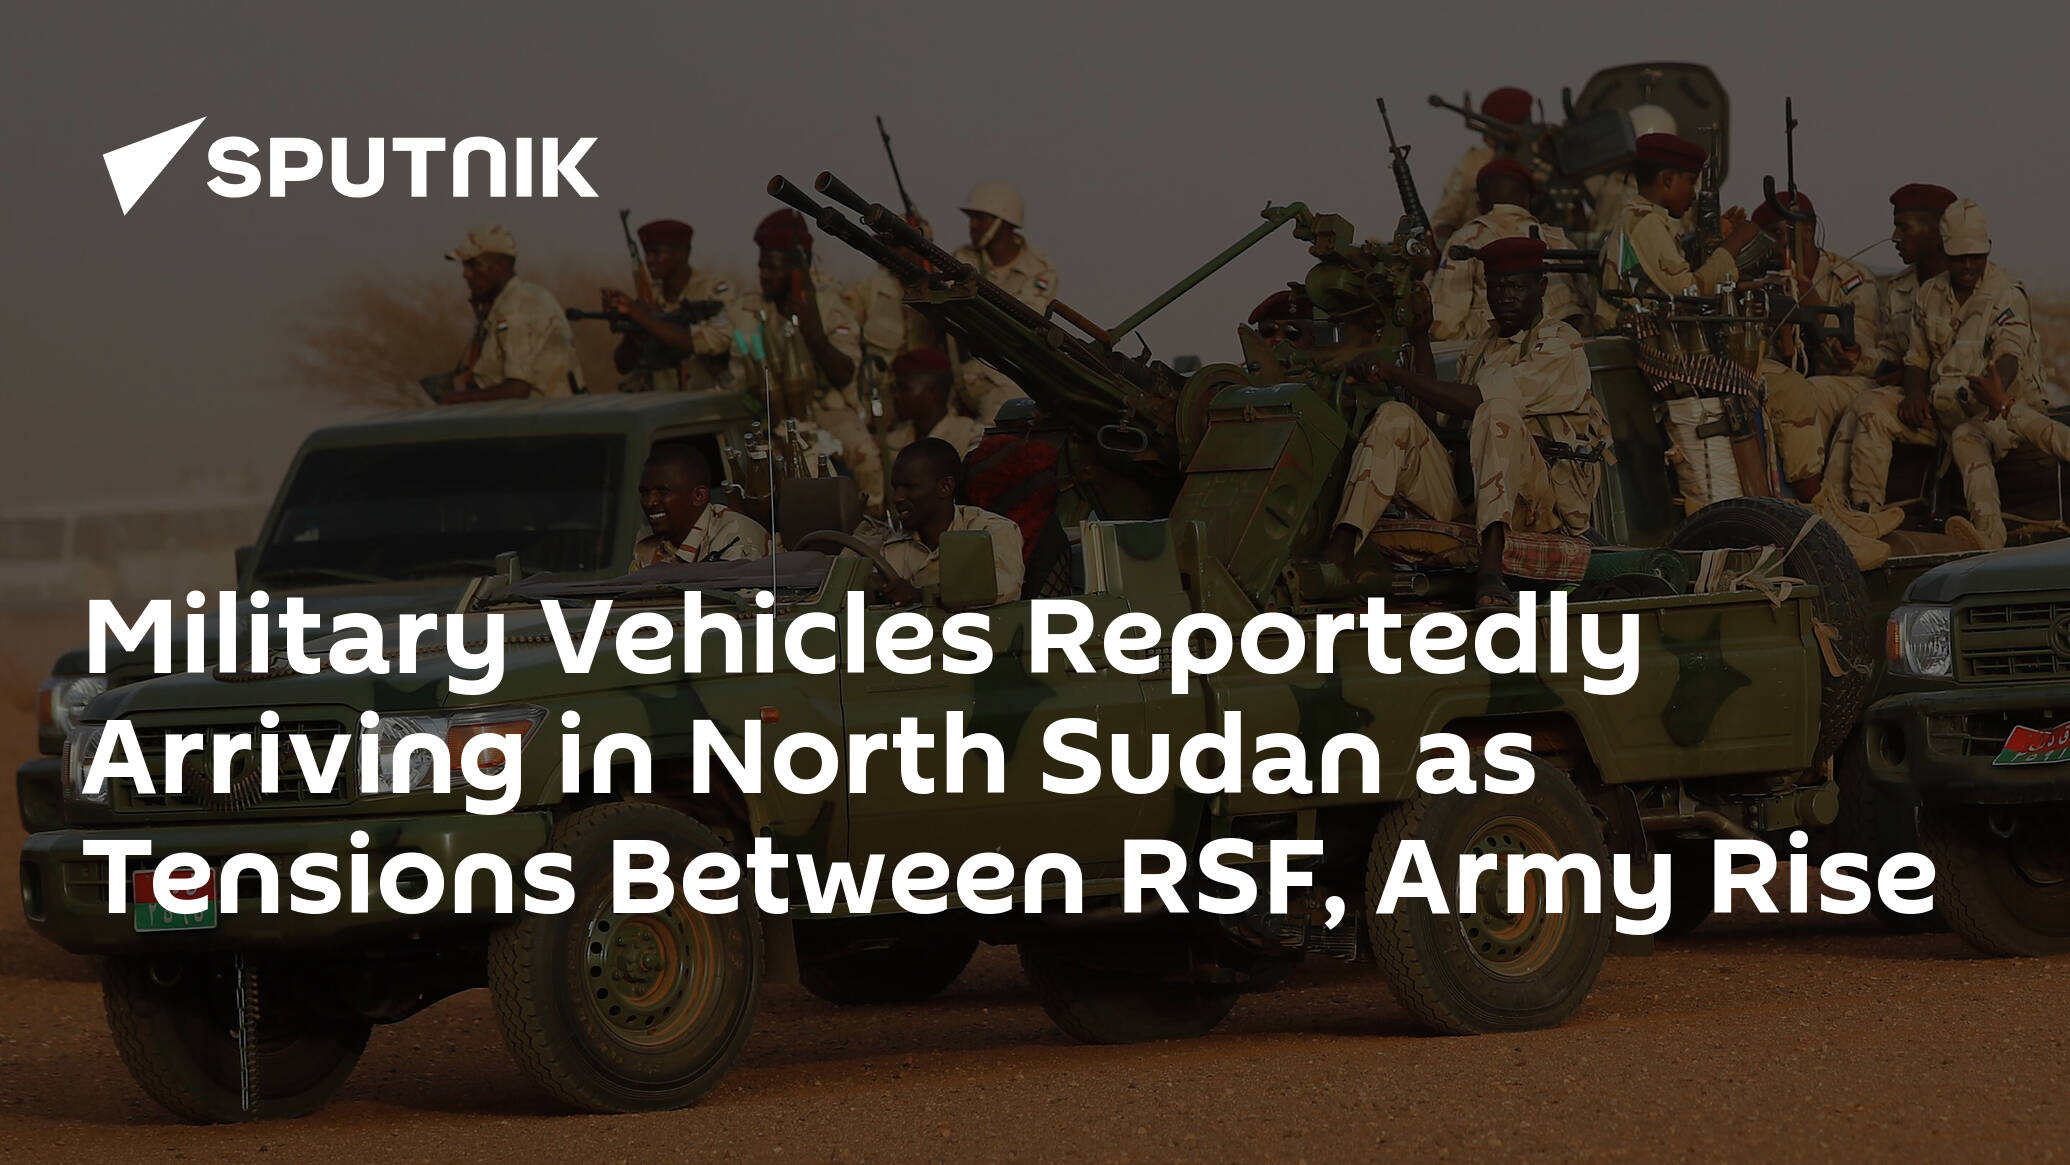 Military Vehicles Arriving in North Sudan as Tensions Between RSF, Army Rise – Reports